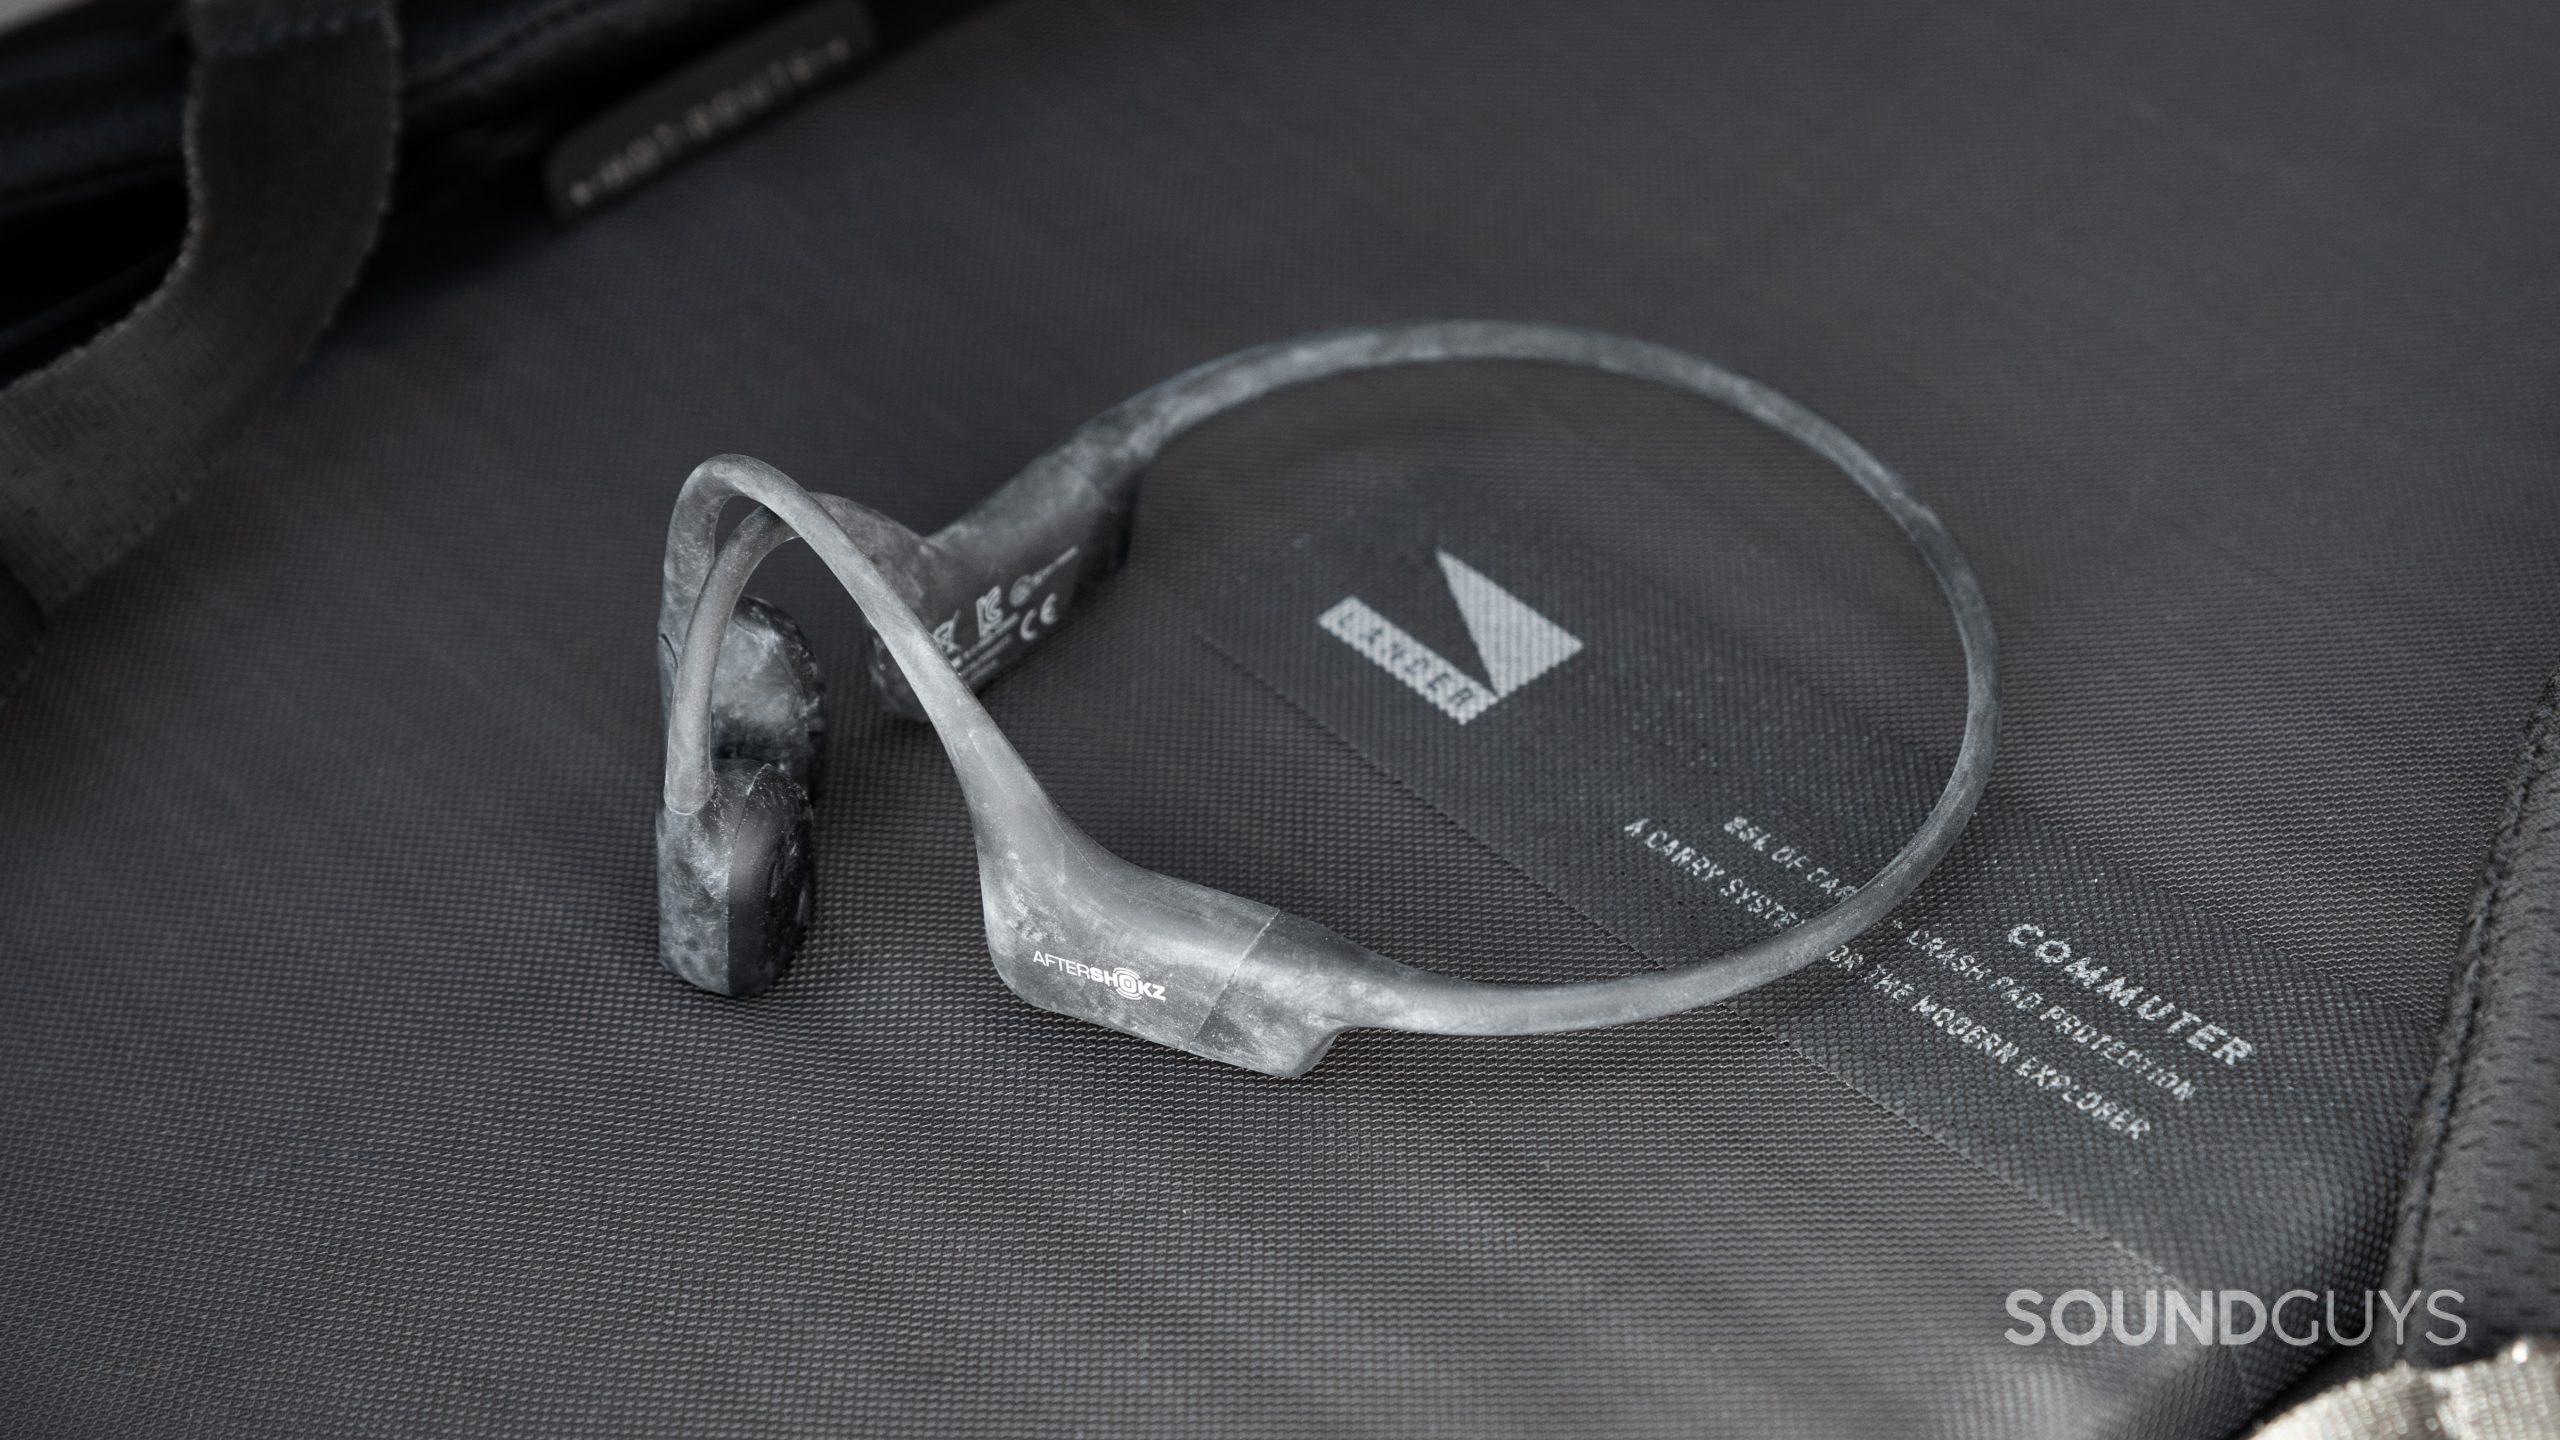 The Aftershokz Aeropex is covered in chalk while resting on a black surface.